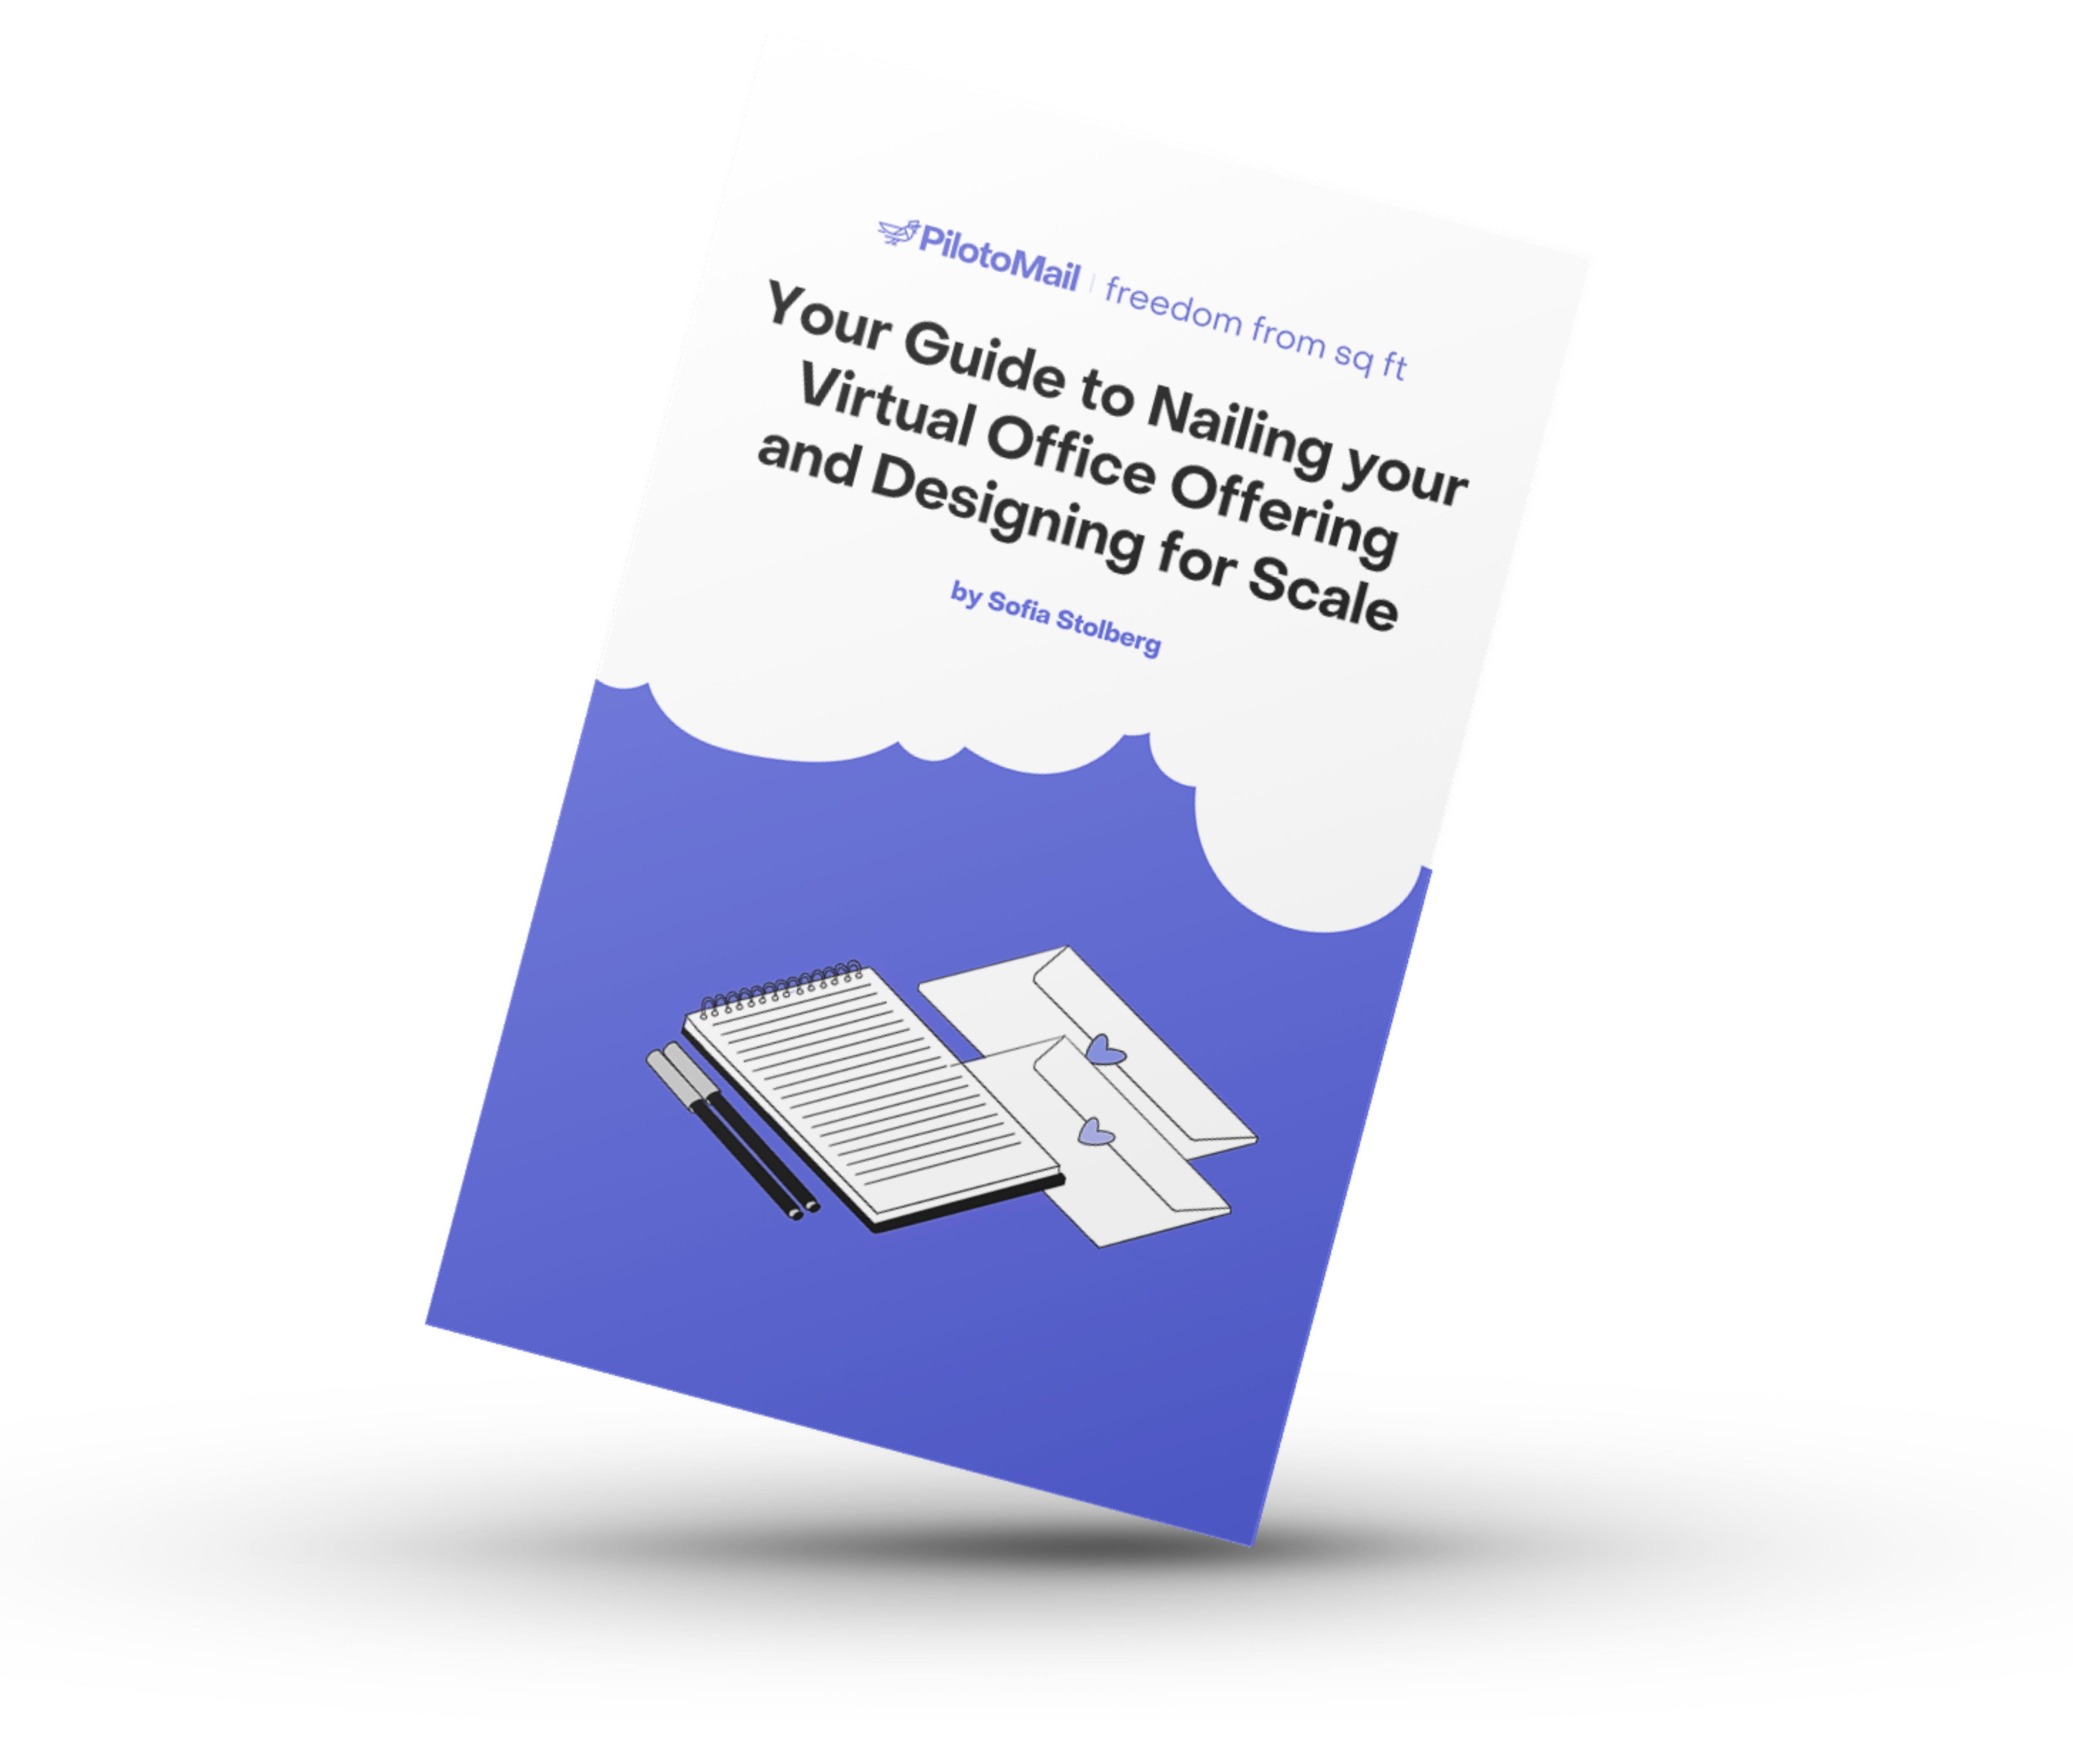 nail your virtual office offering guide